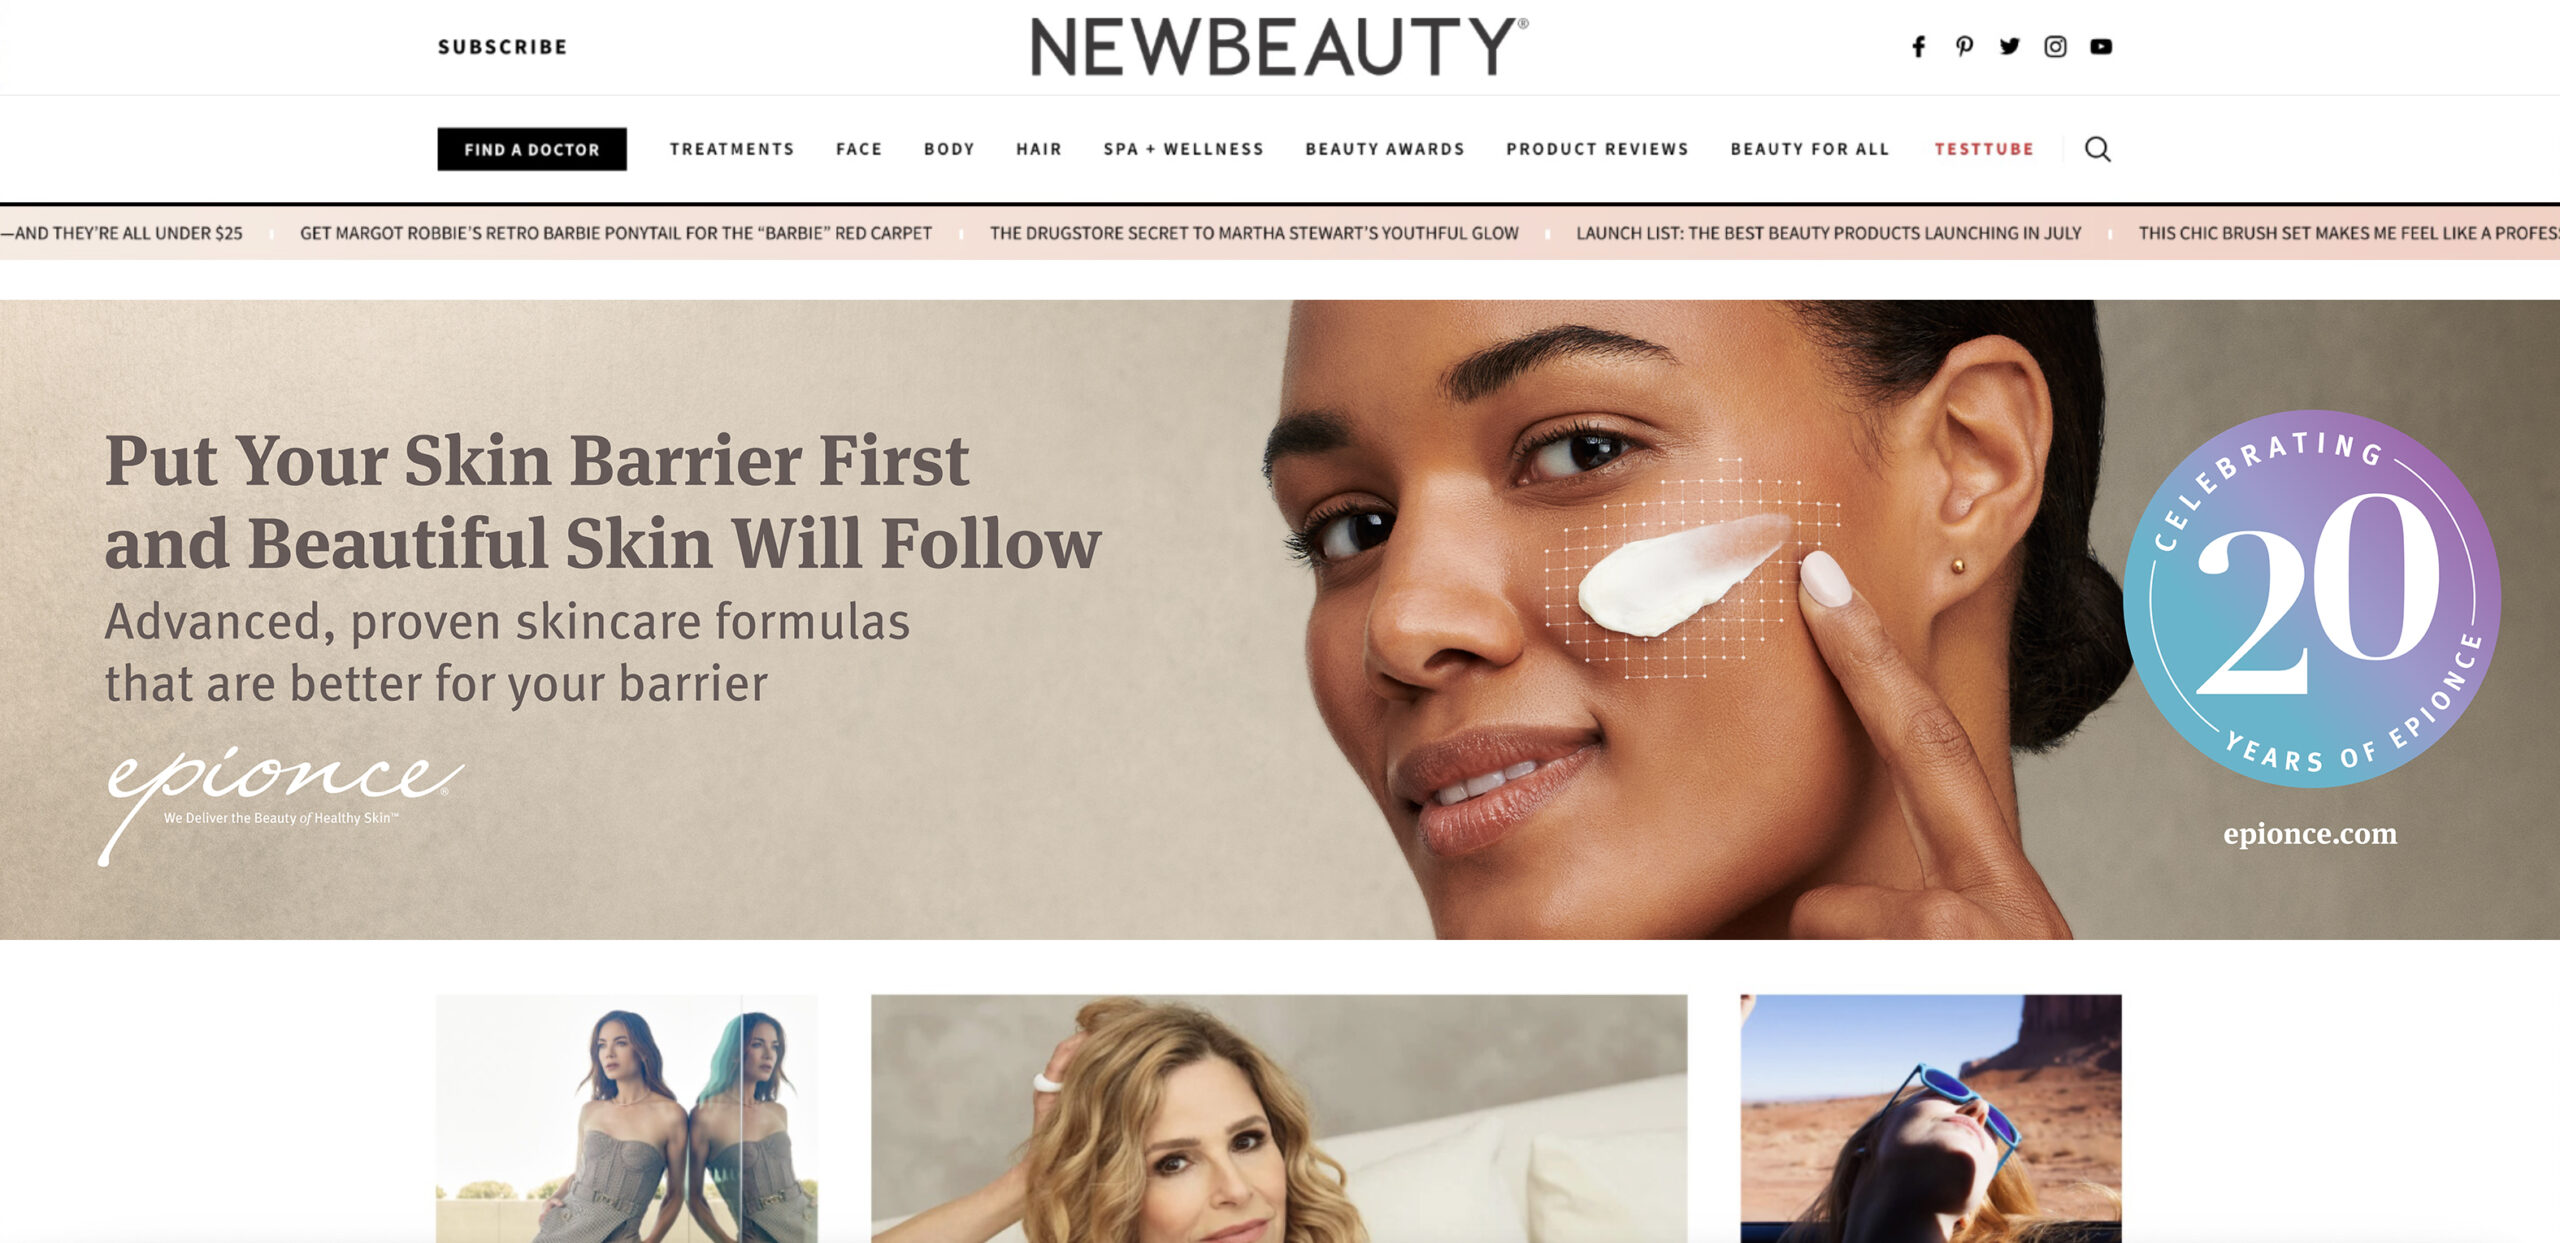 Epionce Campaign Development: NewBeauty Homepage Takeover